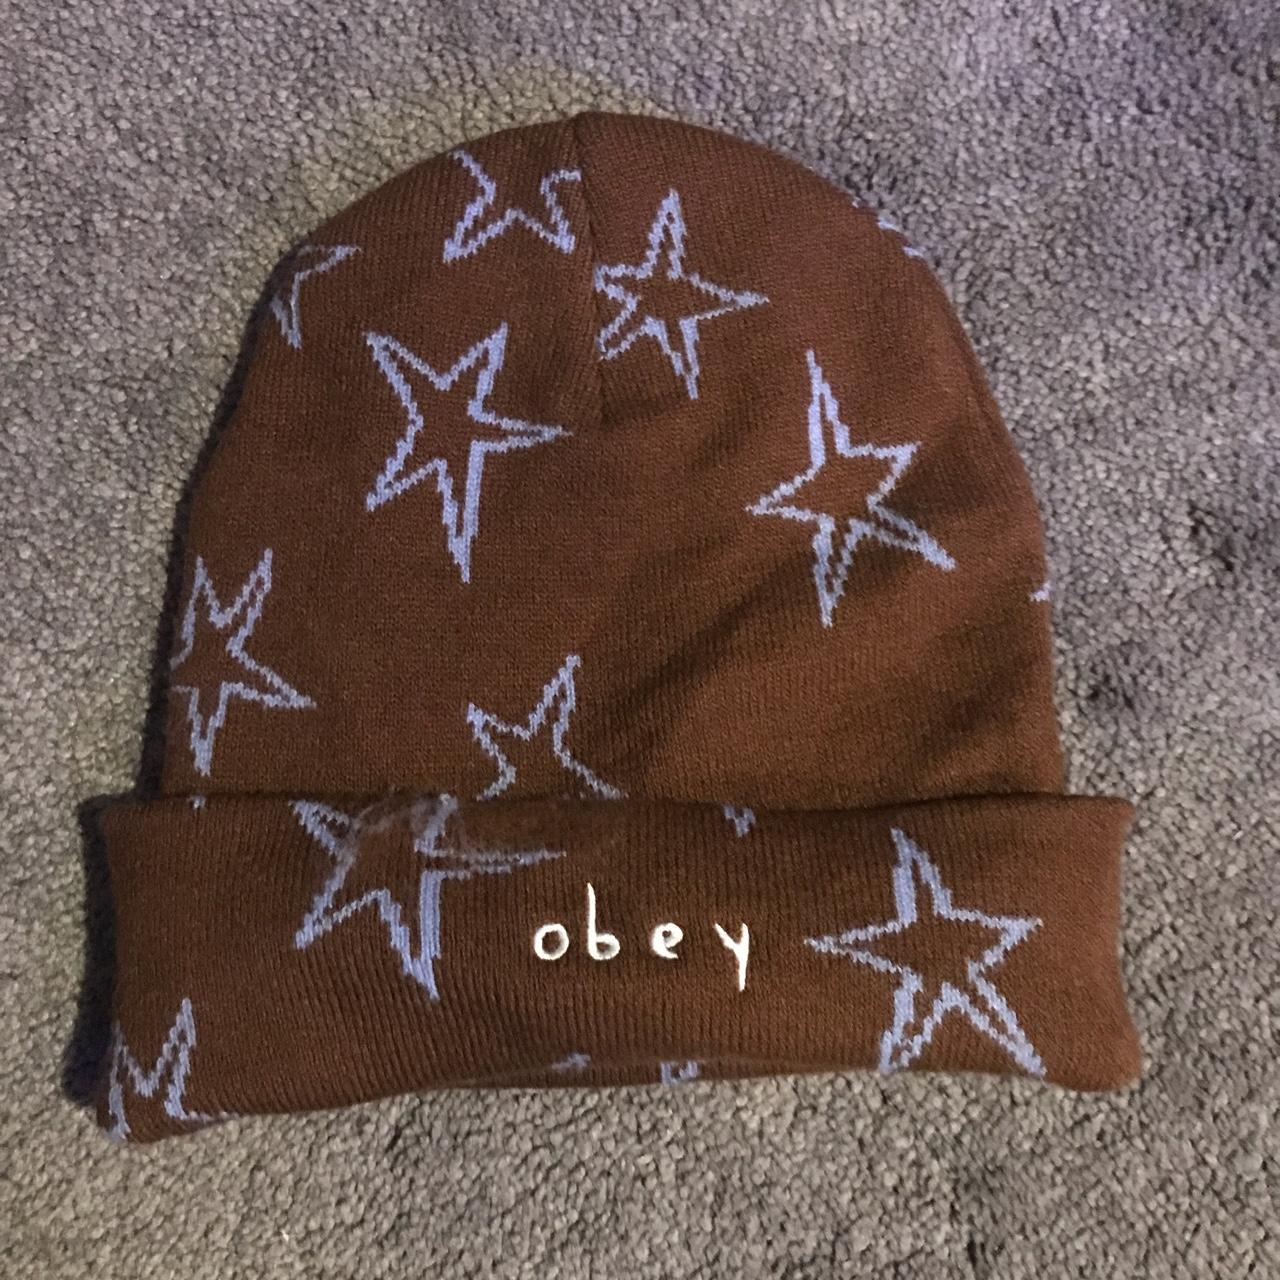 Obey Men's Brown and Blue Hat